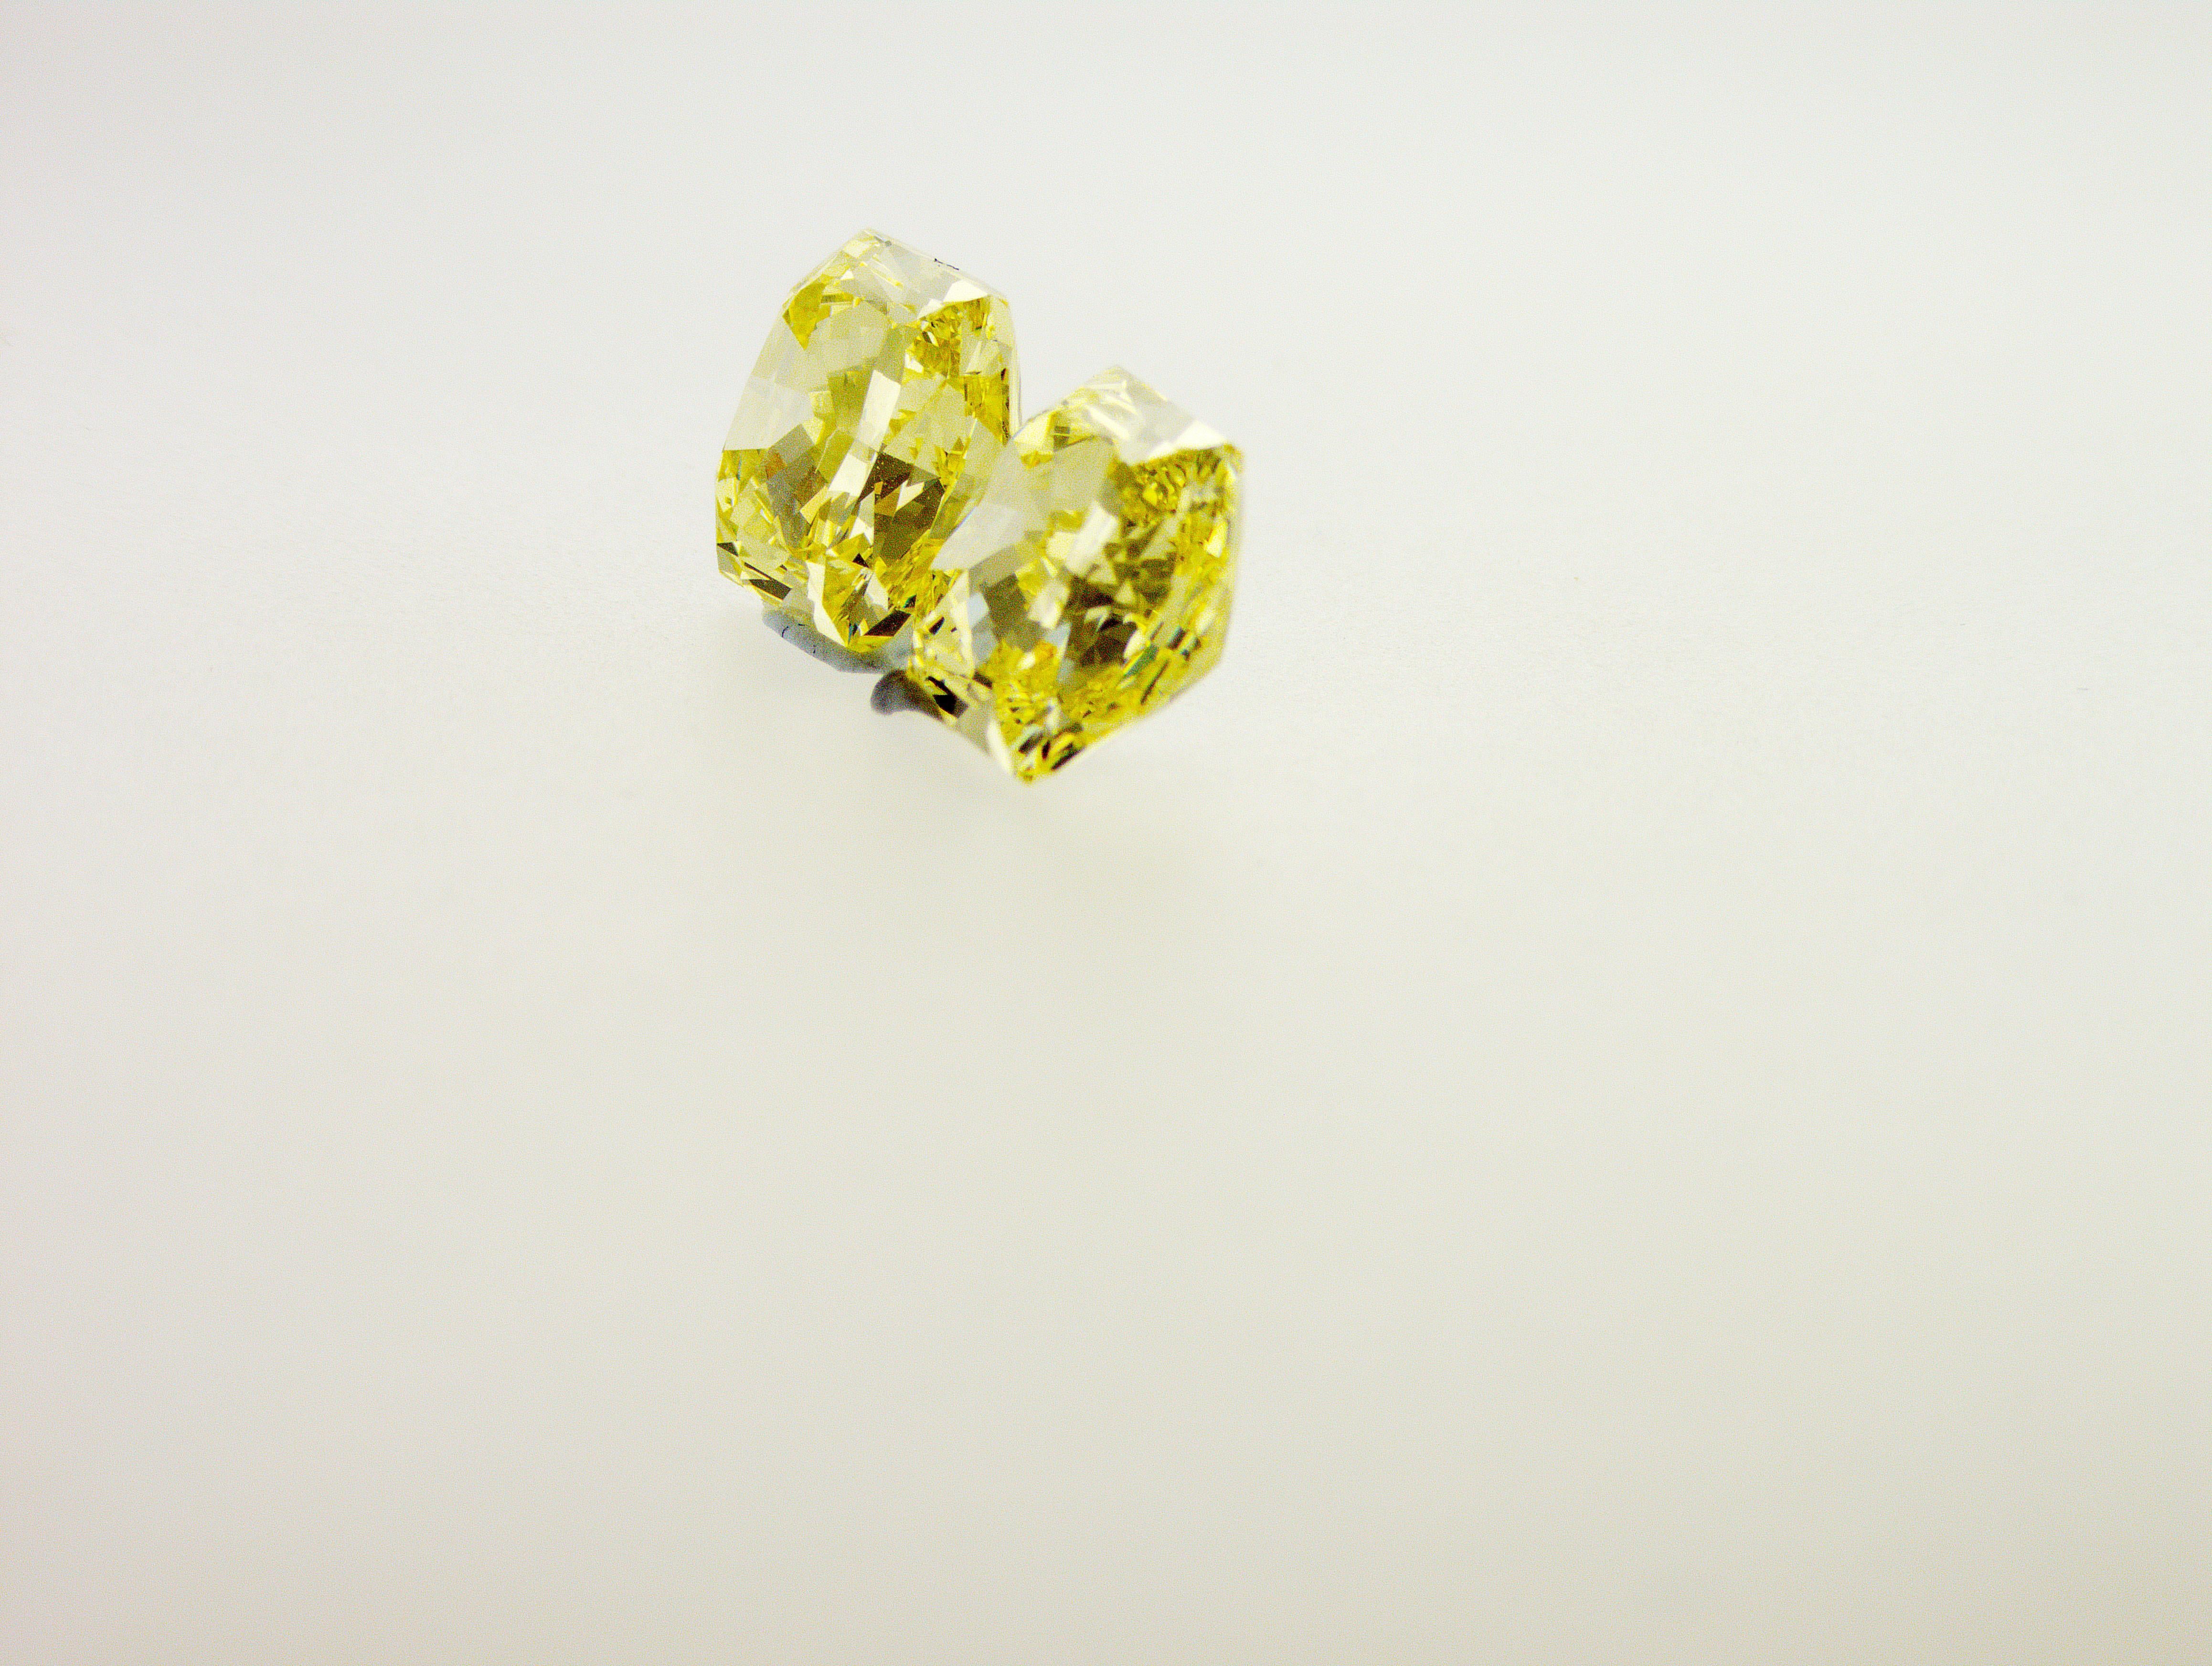 Very unique and rare pair of Fancy Intense Yellow Diamonds 3.02 and 3.07 carats. These two diamonds has been made from one rough diamond stone. 
1st diamond 8.39x7.81x5.01 mm - 3.02 ct Fancy Intense Yellow
2nd diamond 8.49x7.91x5.04 mm - 3.07 ct